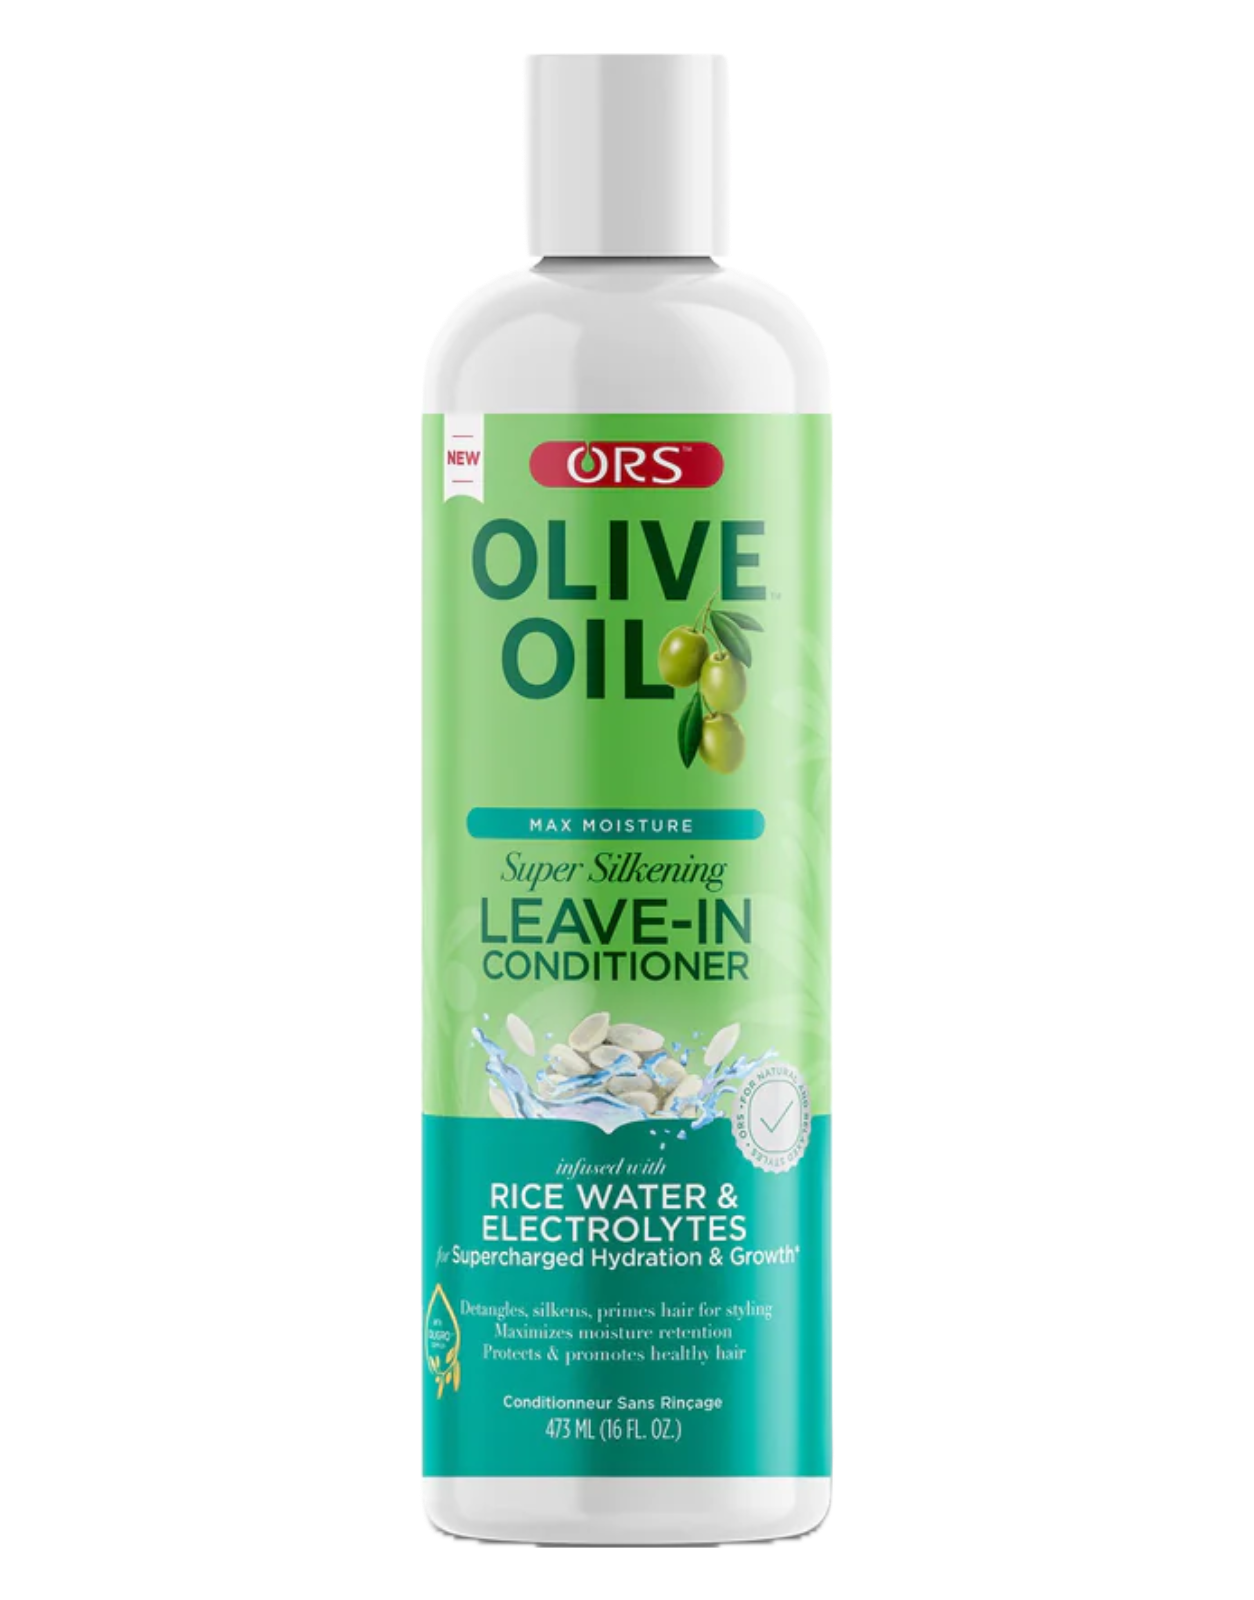 ORS - Olive Oil Max Moisture Super Silkening Leave-In Conditioner